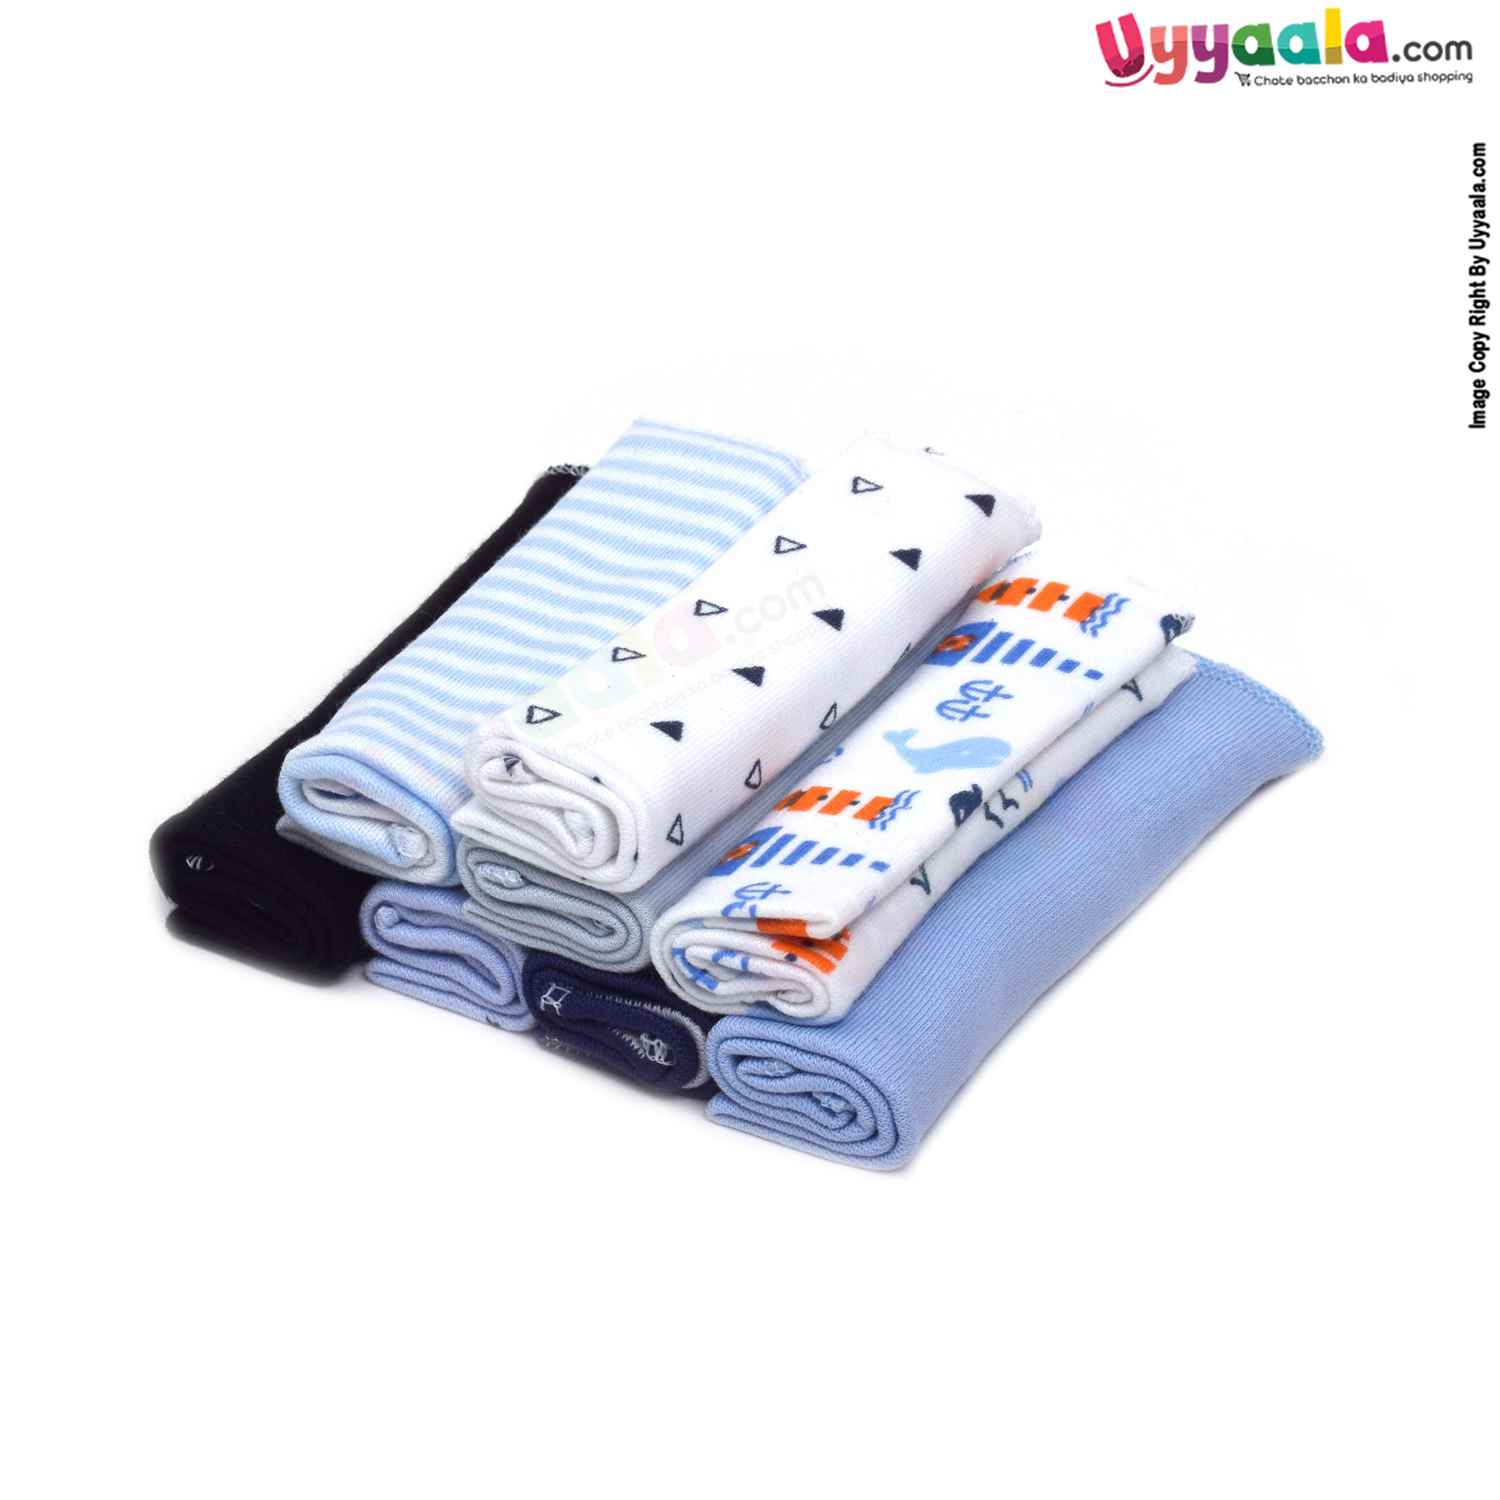 GERBER Baby Washcloths Premium Quality Hosiery Cotton (Napkins) Pack of 8, Assorted Prints, 0m+